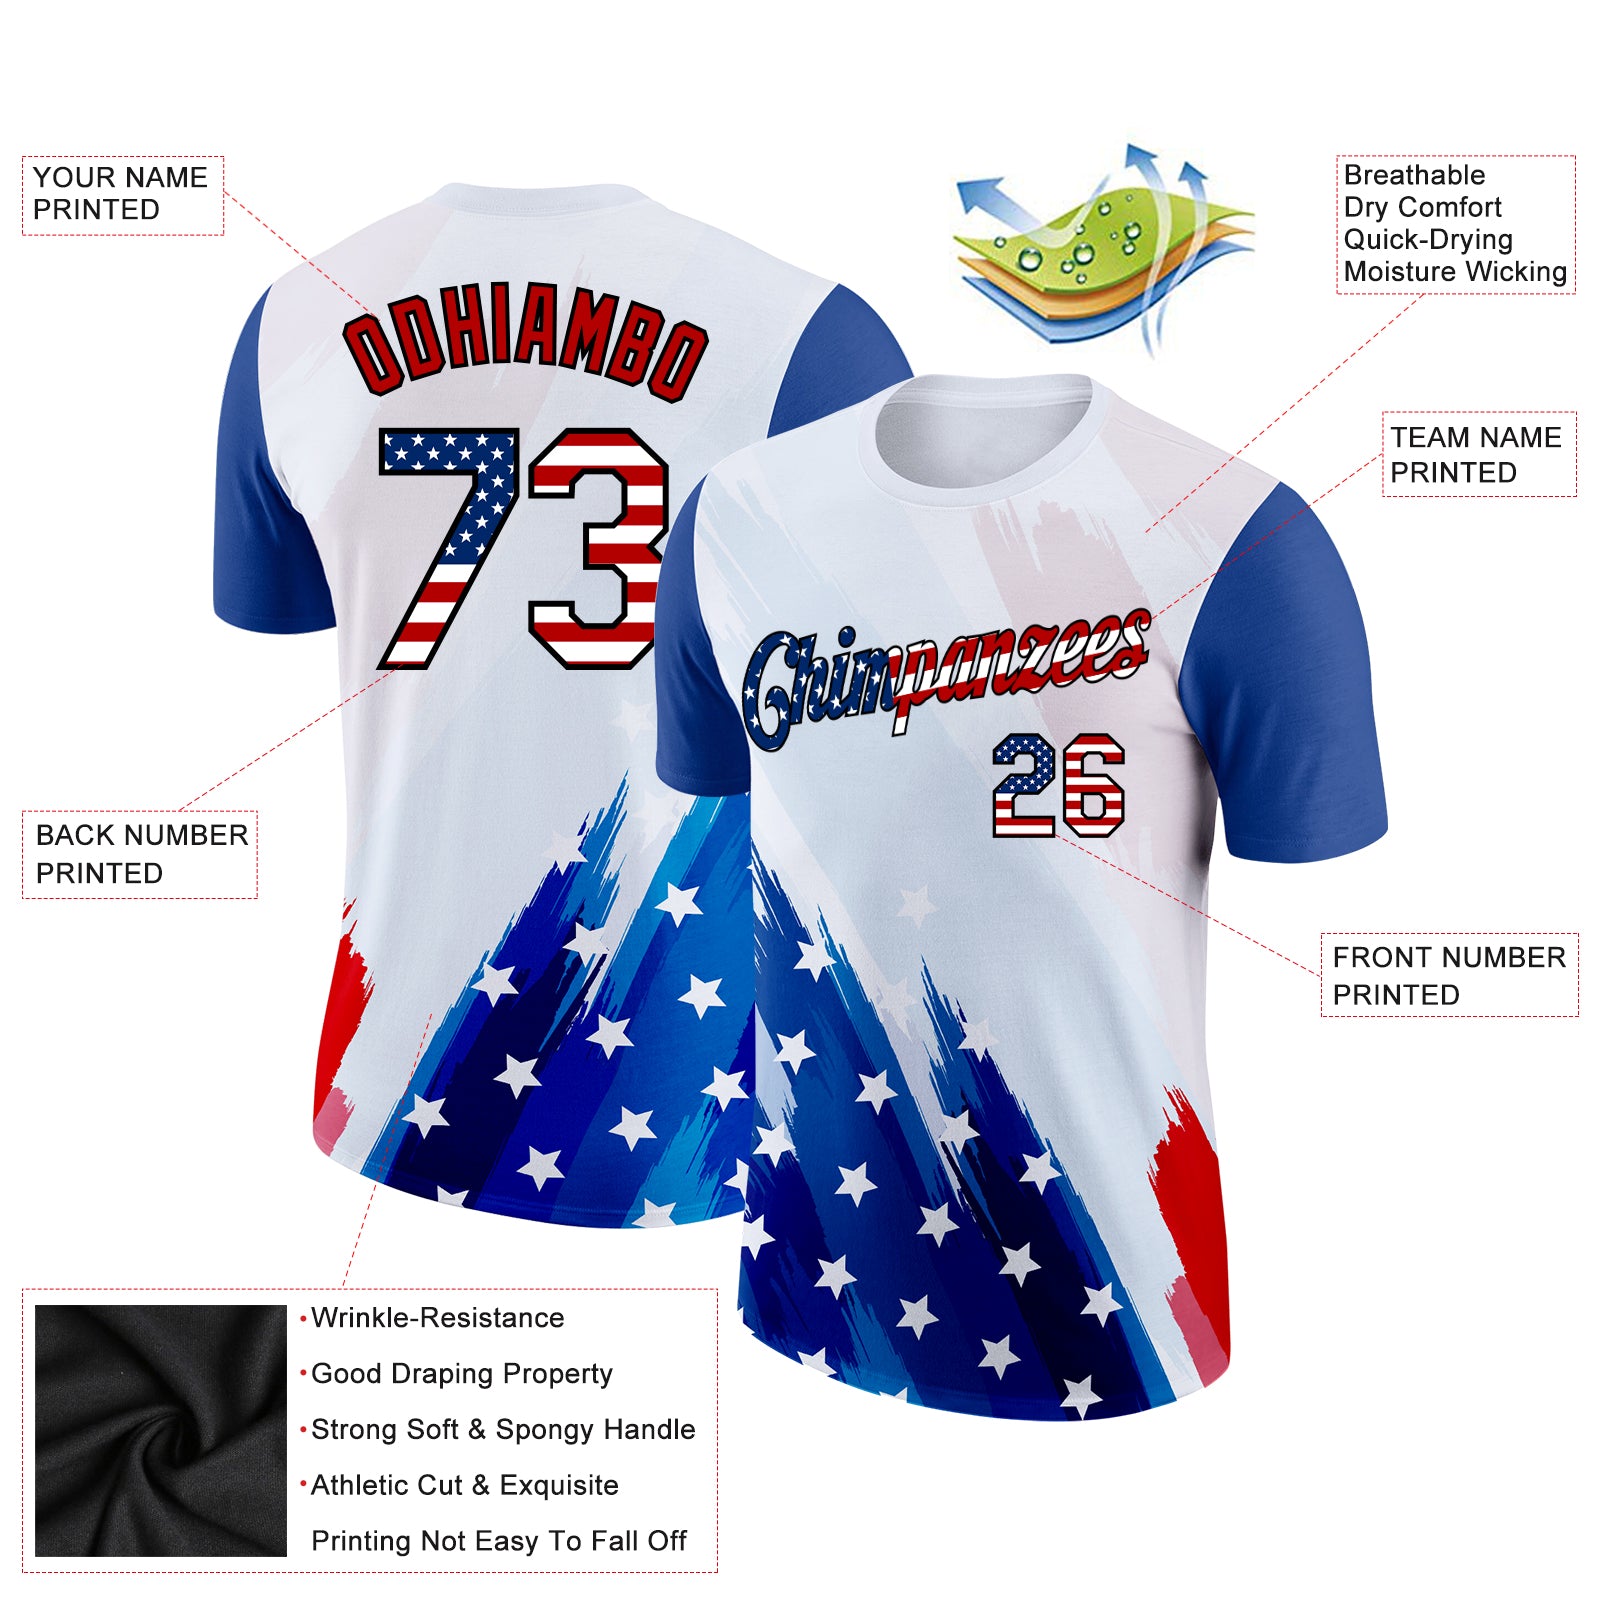 Red and Blue Graphic - Custom Kids Soccer Jerseys Design White